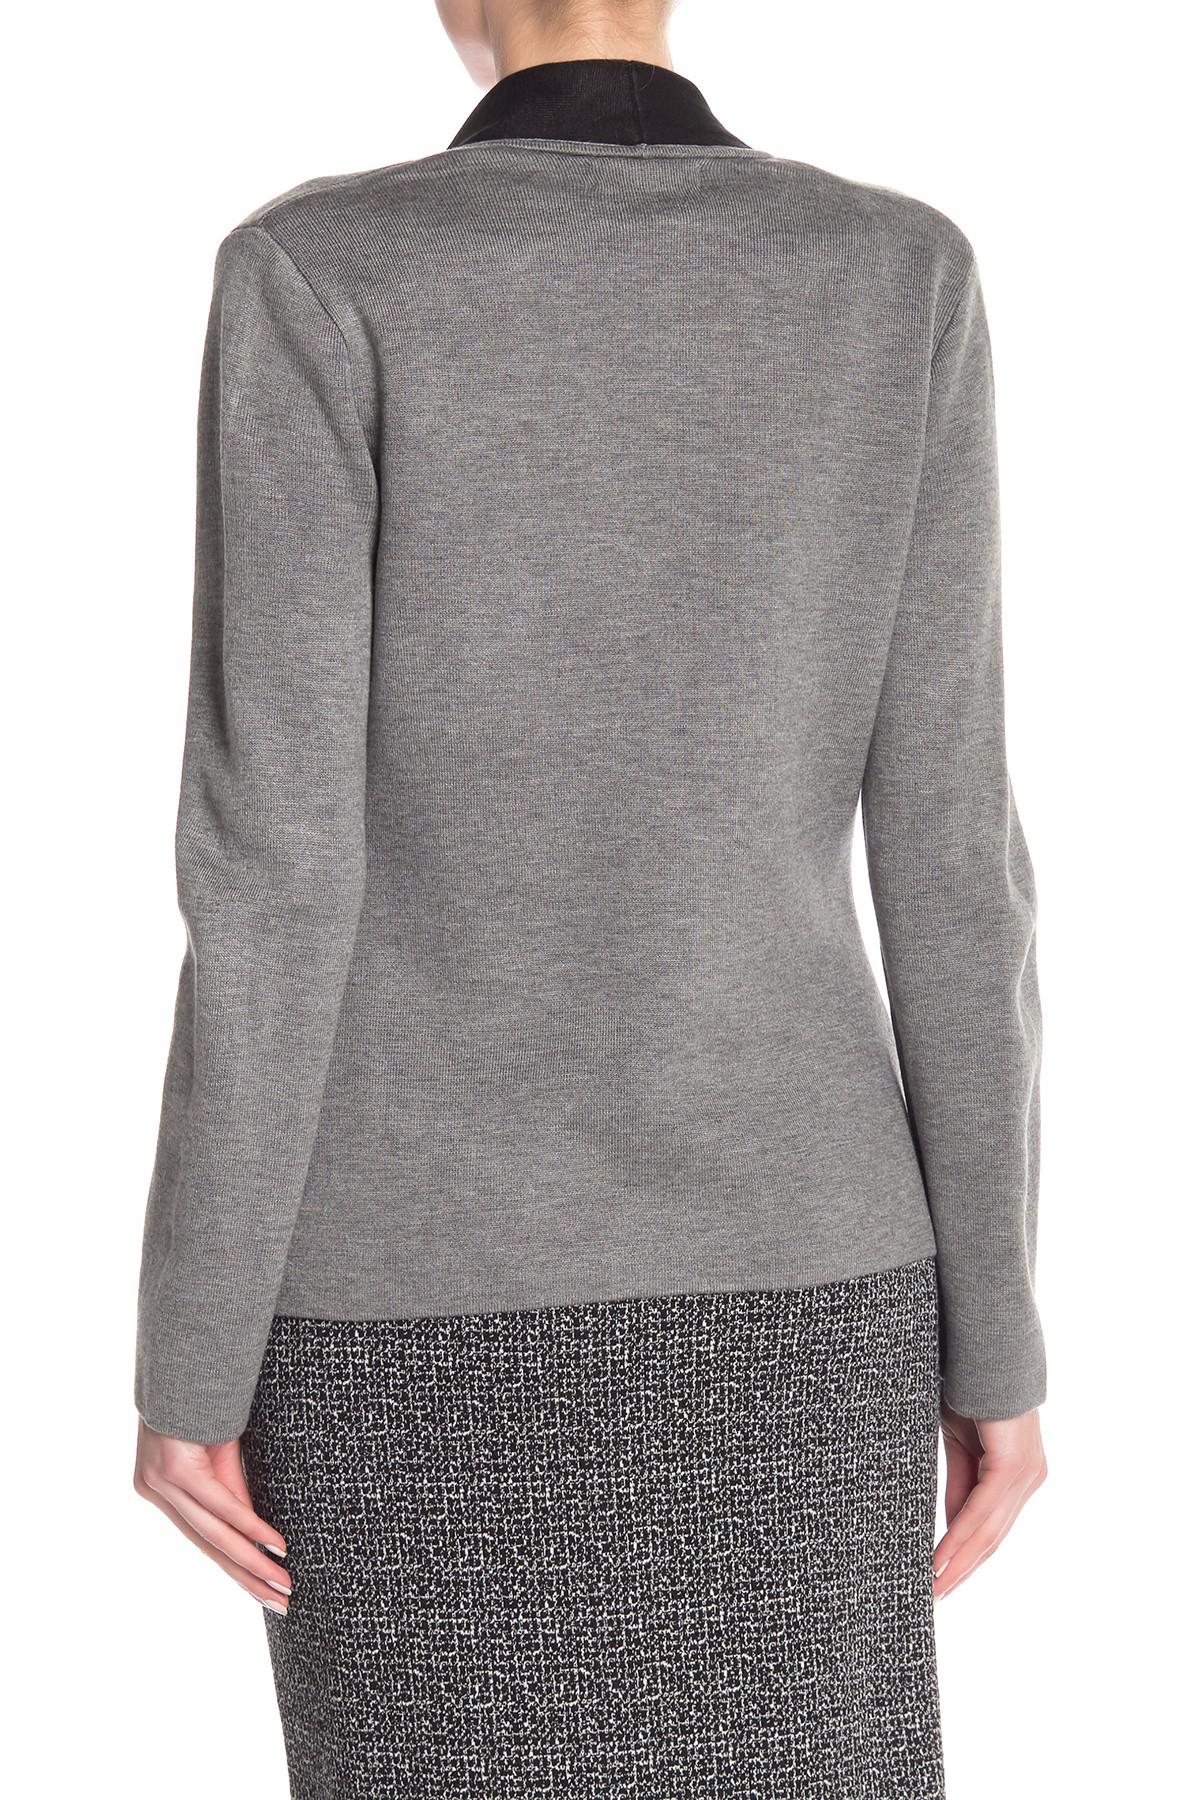 Nine West Synthetic One Button Shawl Sweater in Heather Grey/Black ...